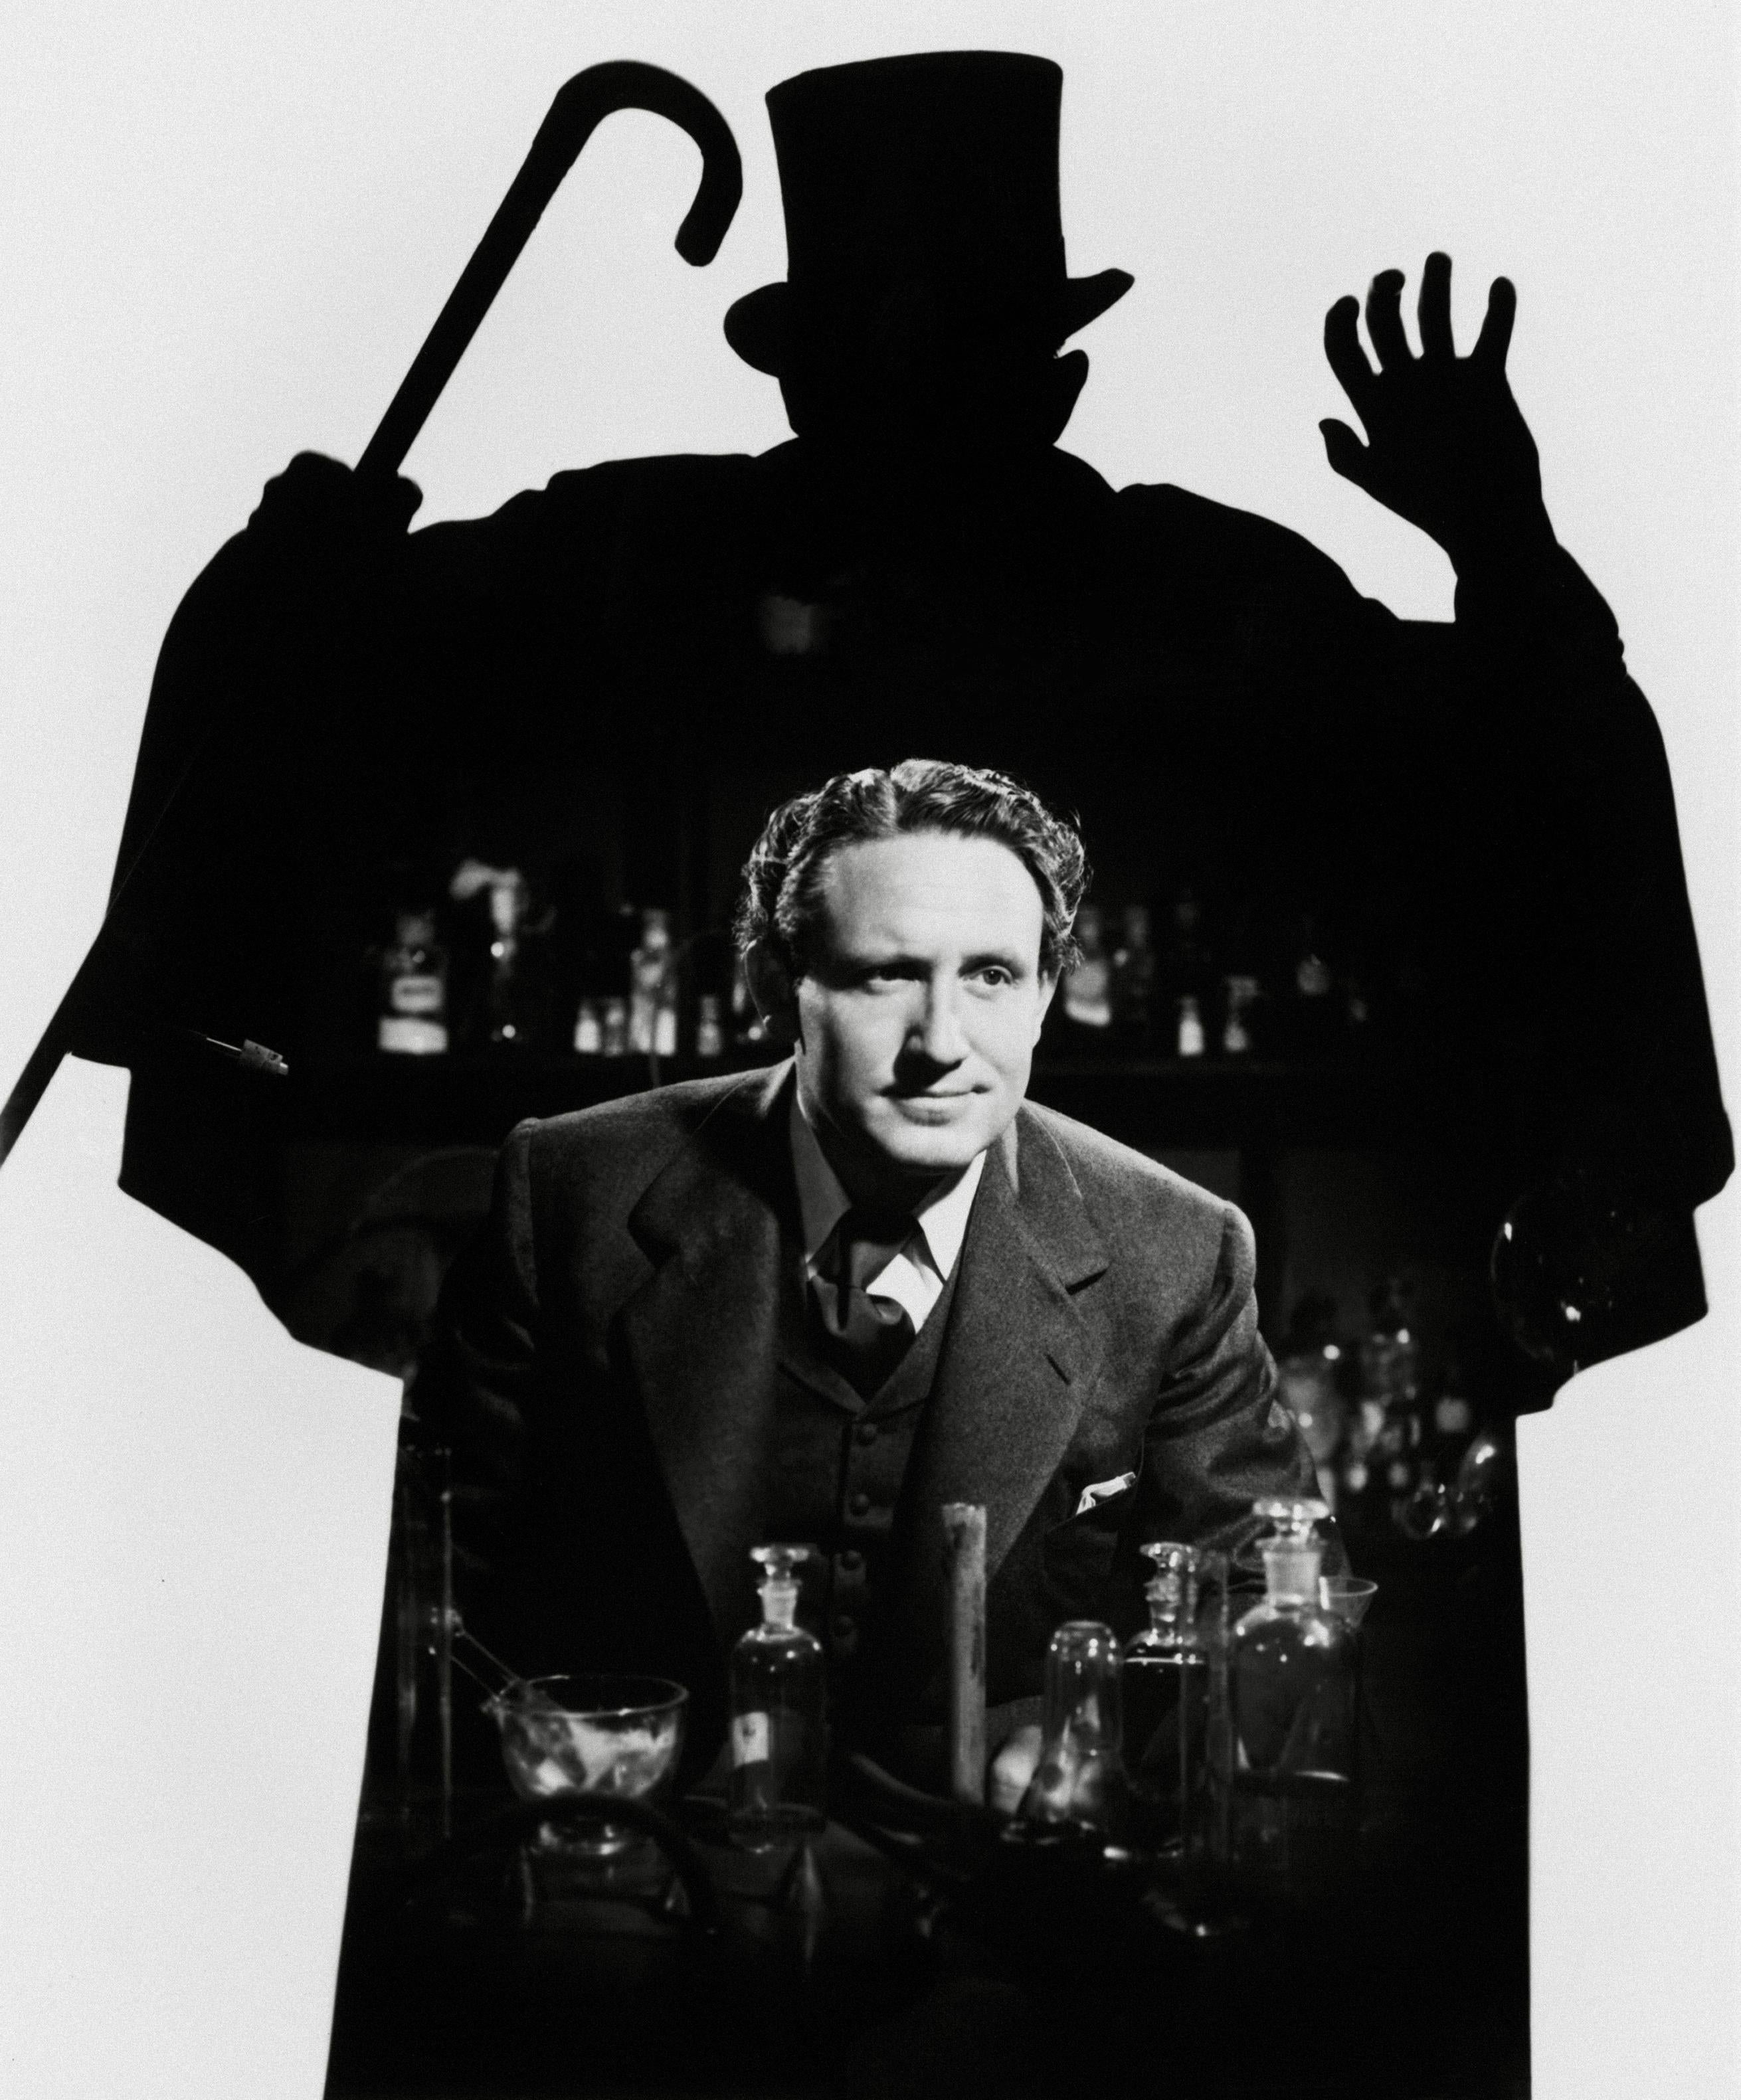 Unknown Portrait Photograph - Spencer Tracy "Dr. Jeckyll and Mr. Hyde" Globe Photos Fine Art Print